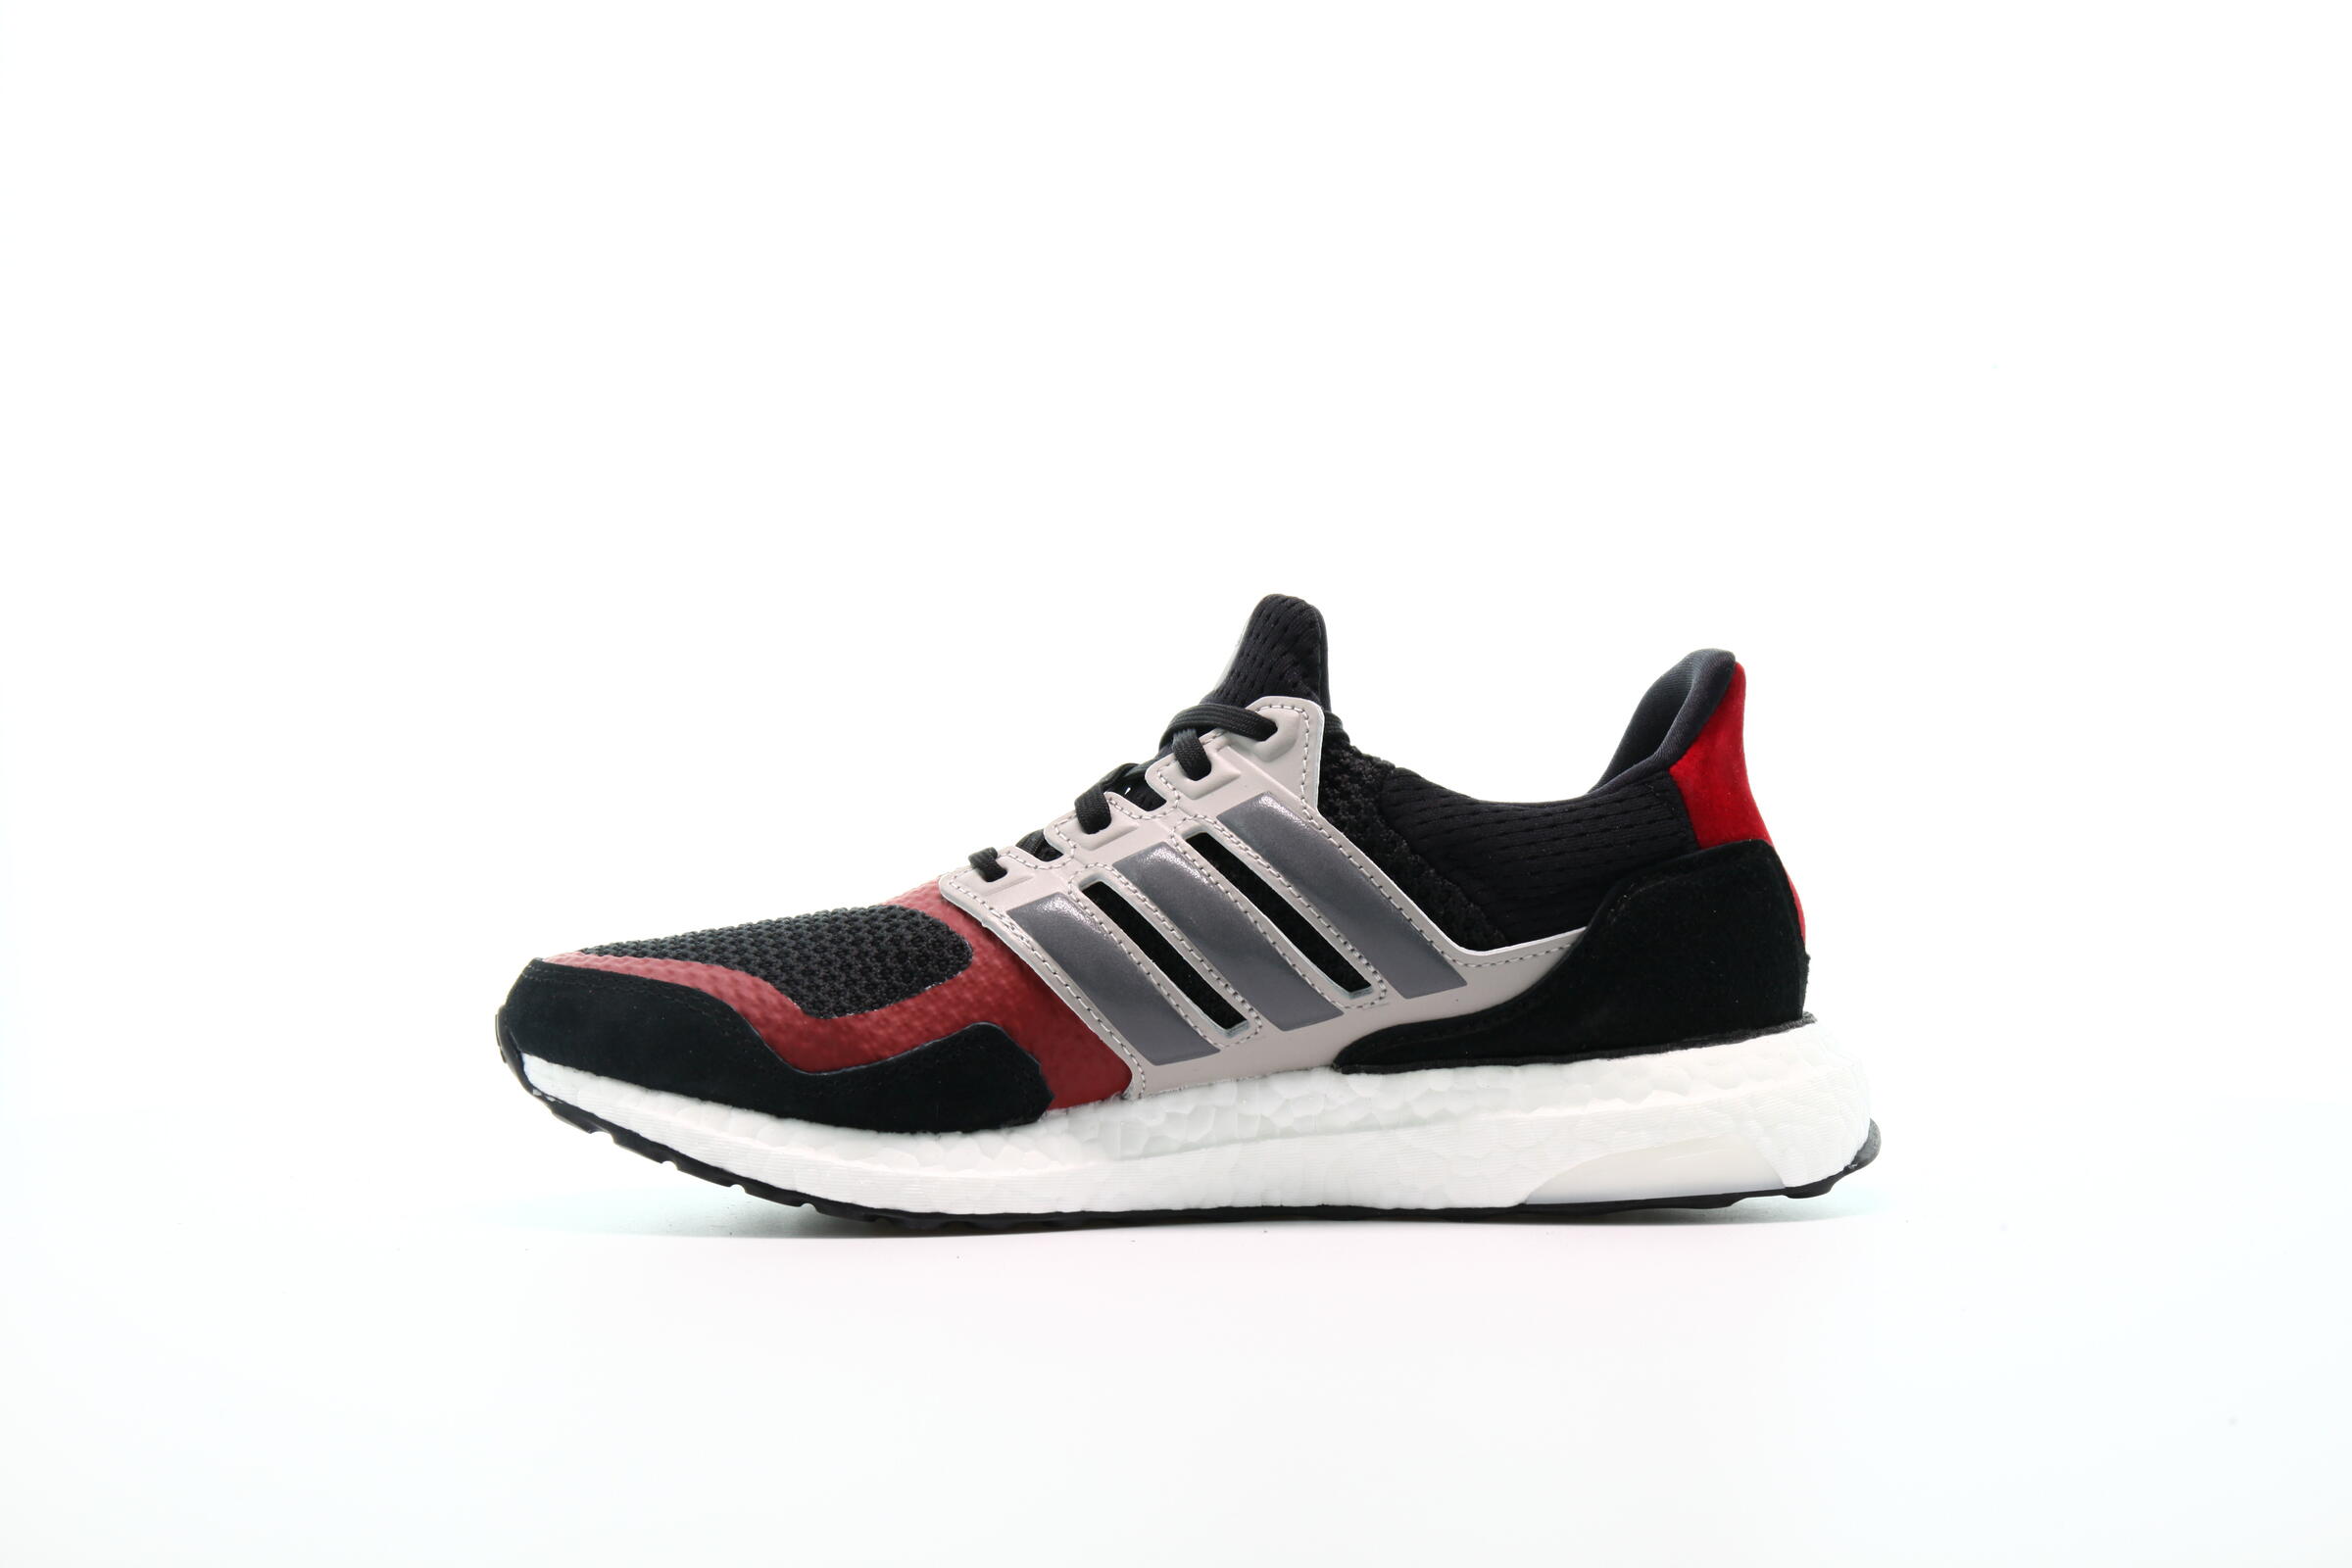 adidas Performance Ultraboost S&L "Power Red"